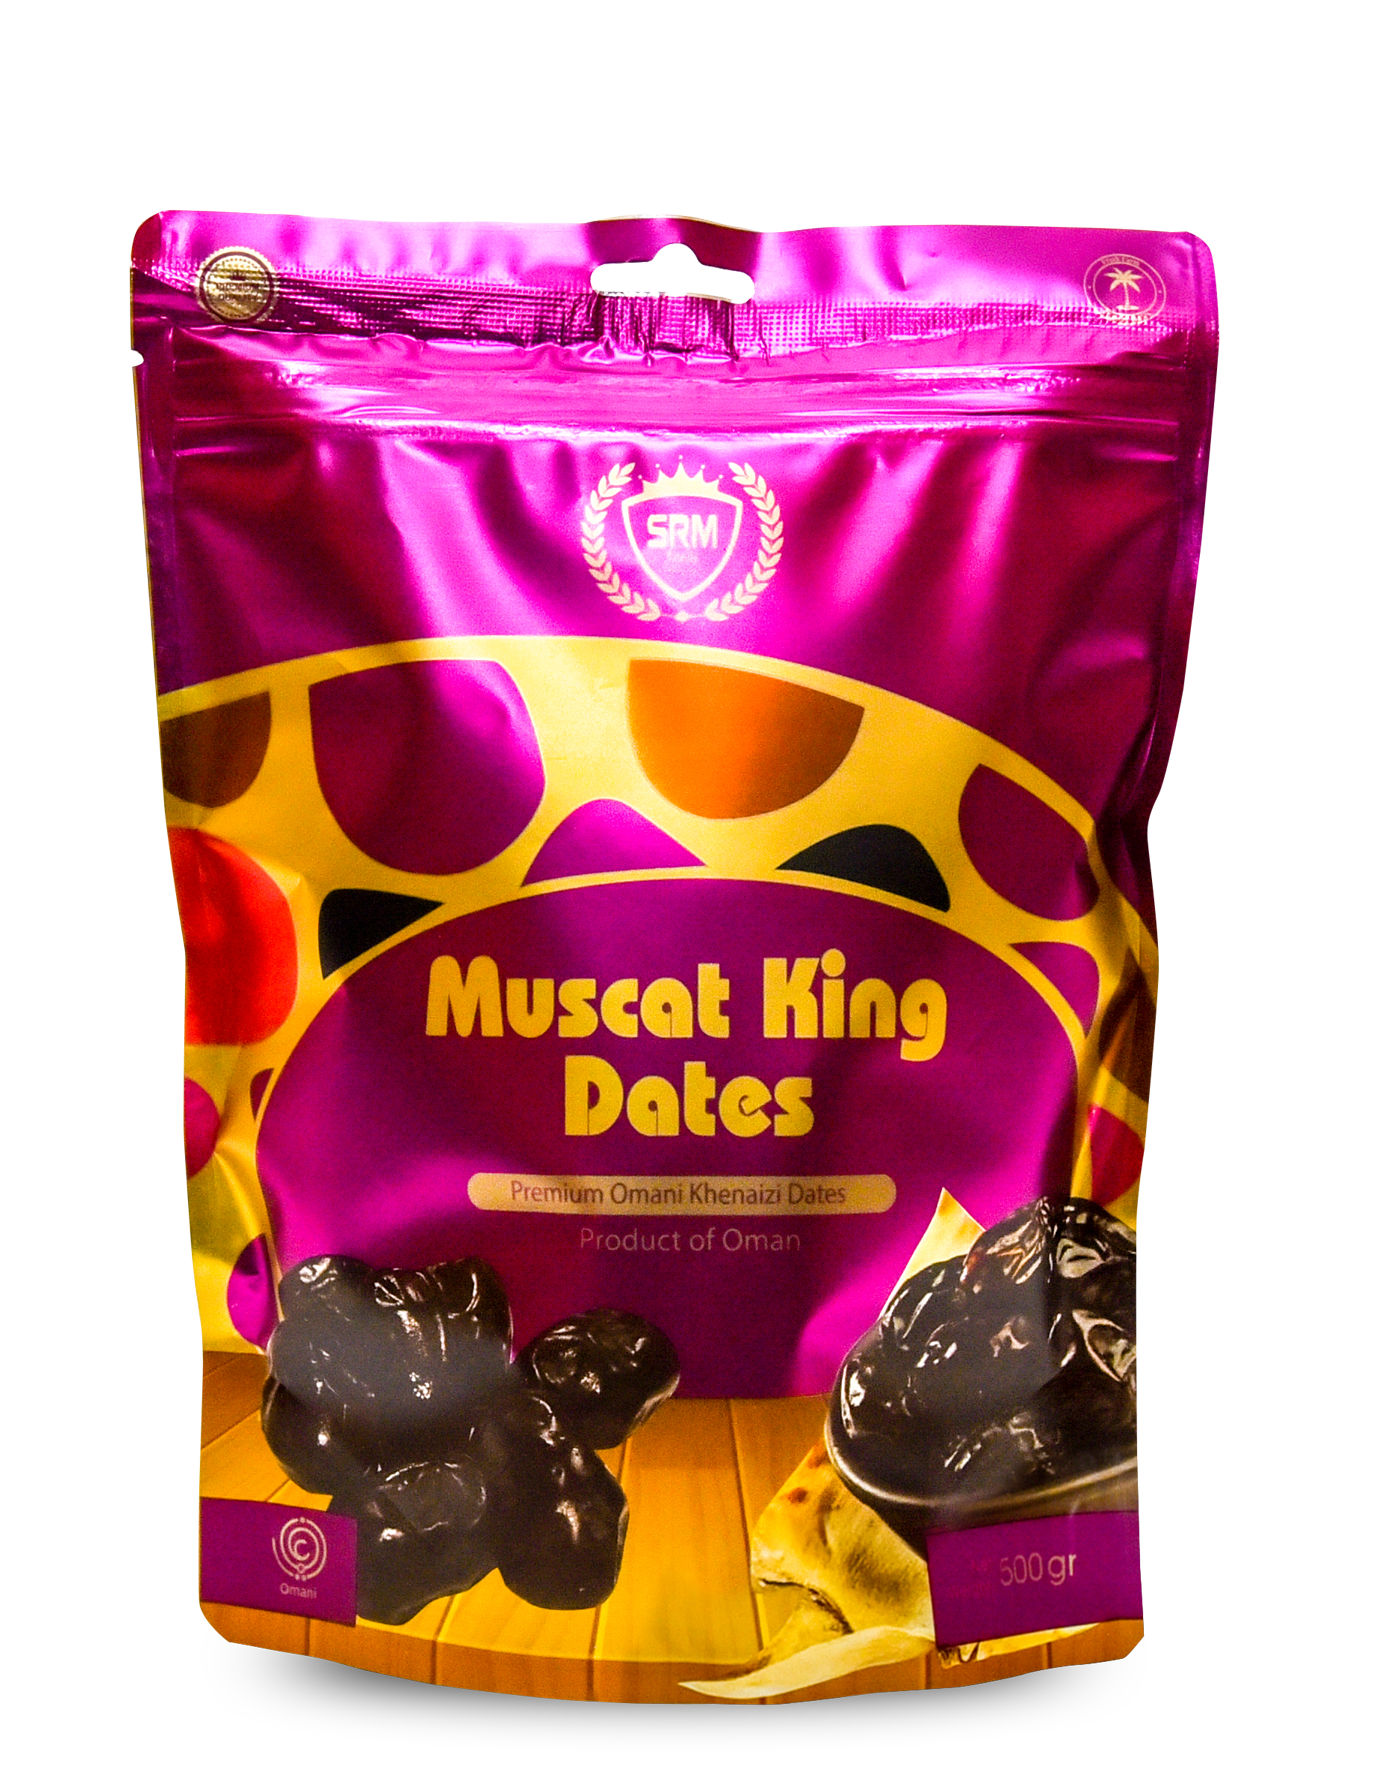 Muscat King Dates